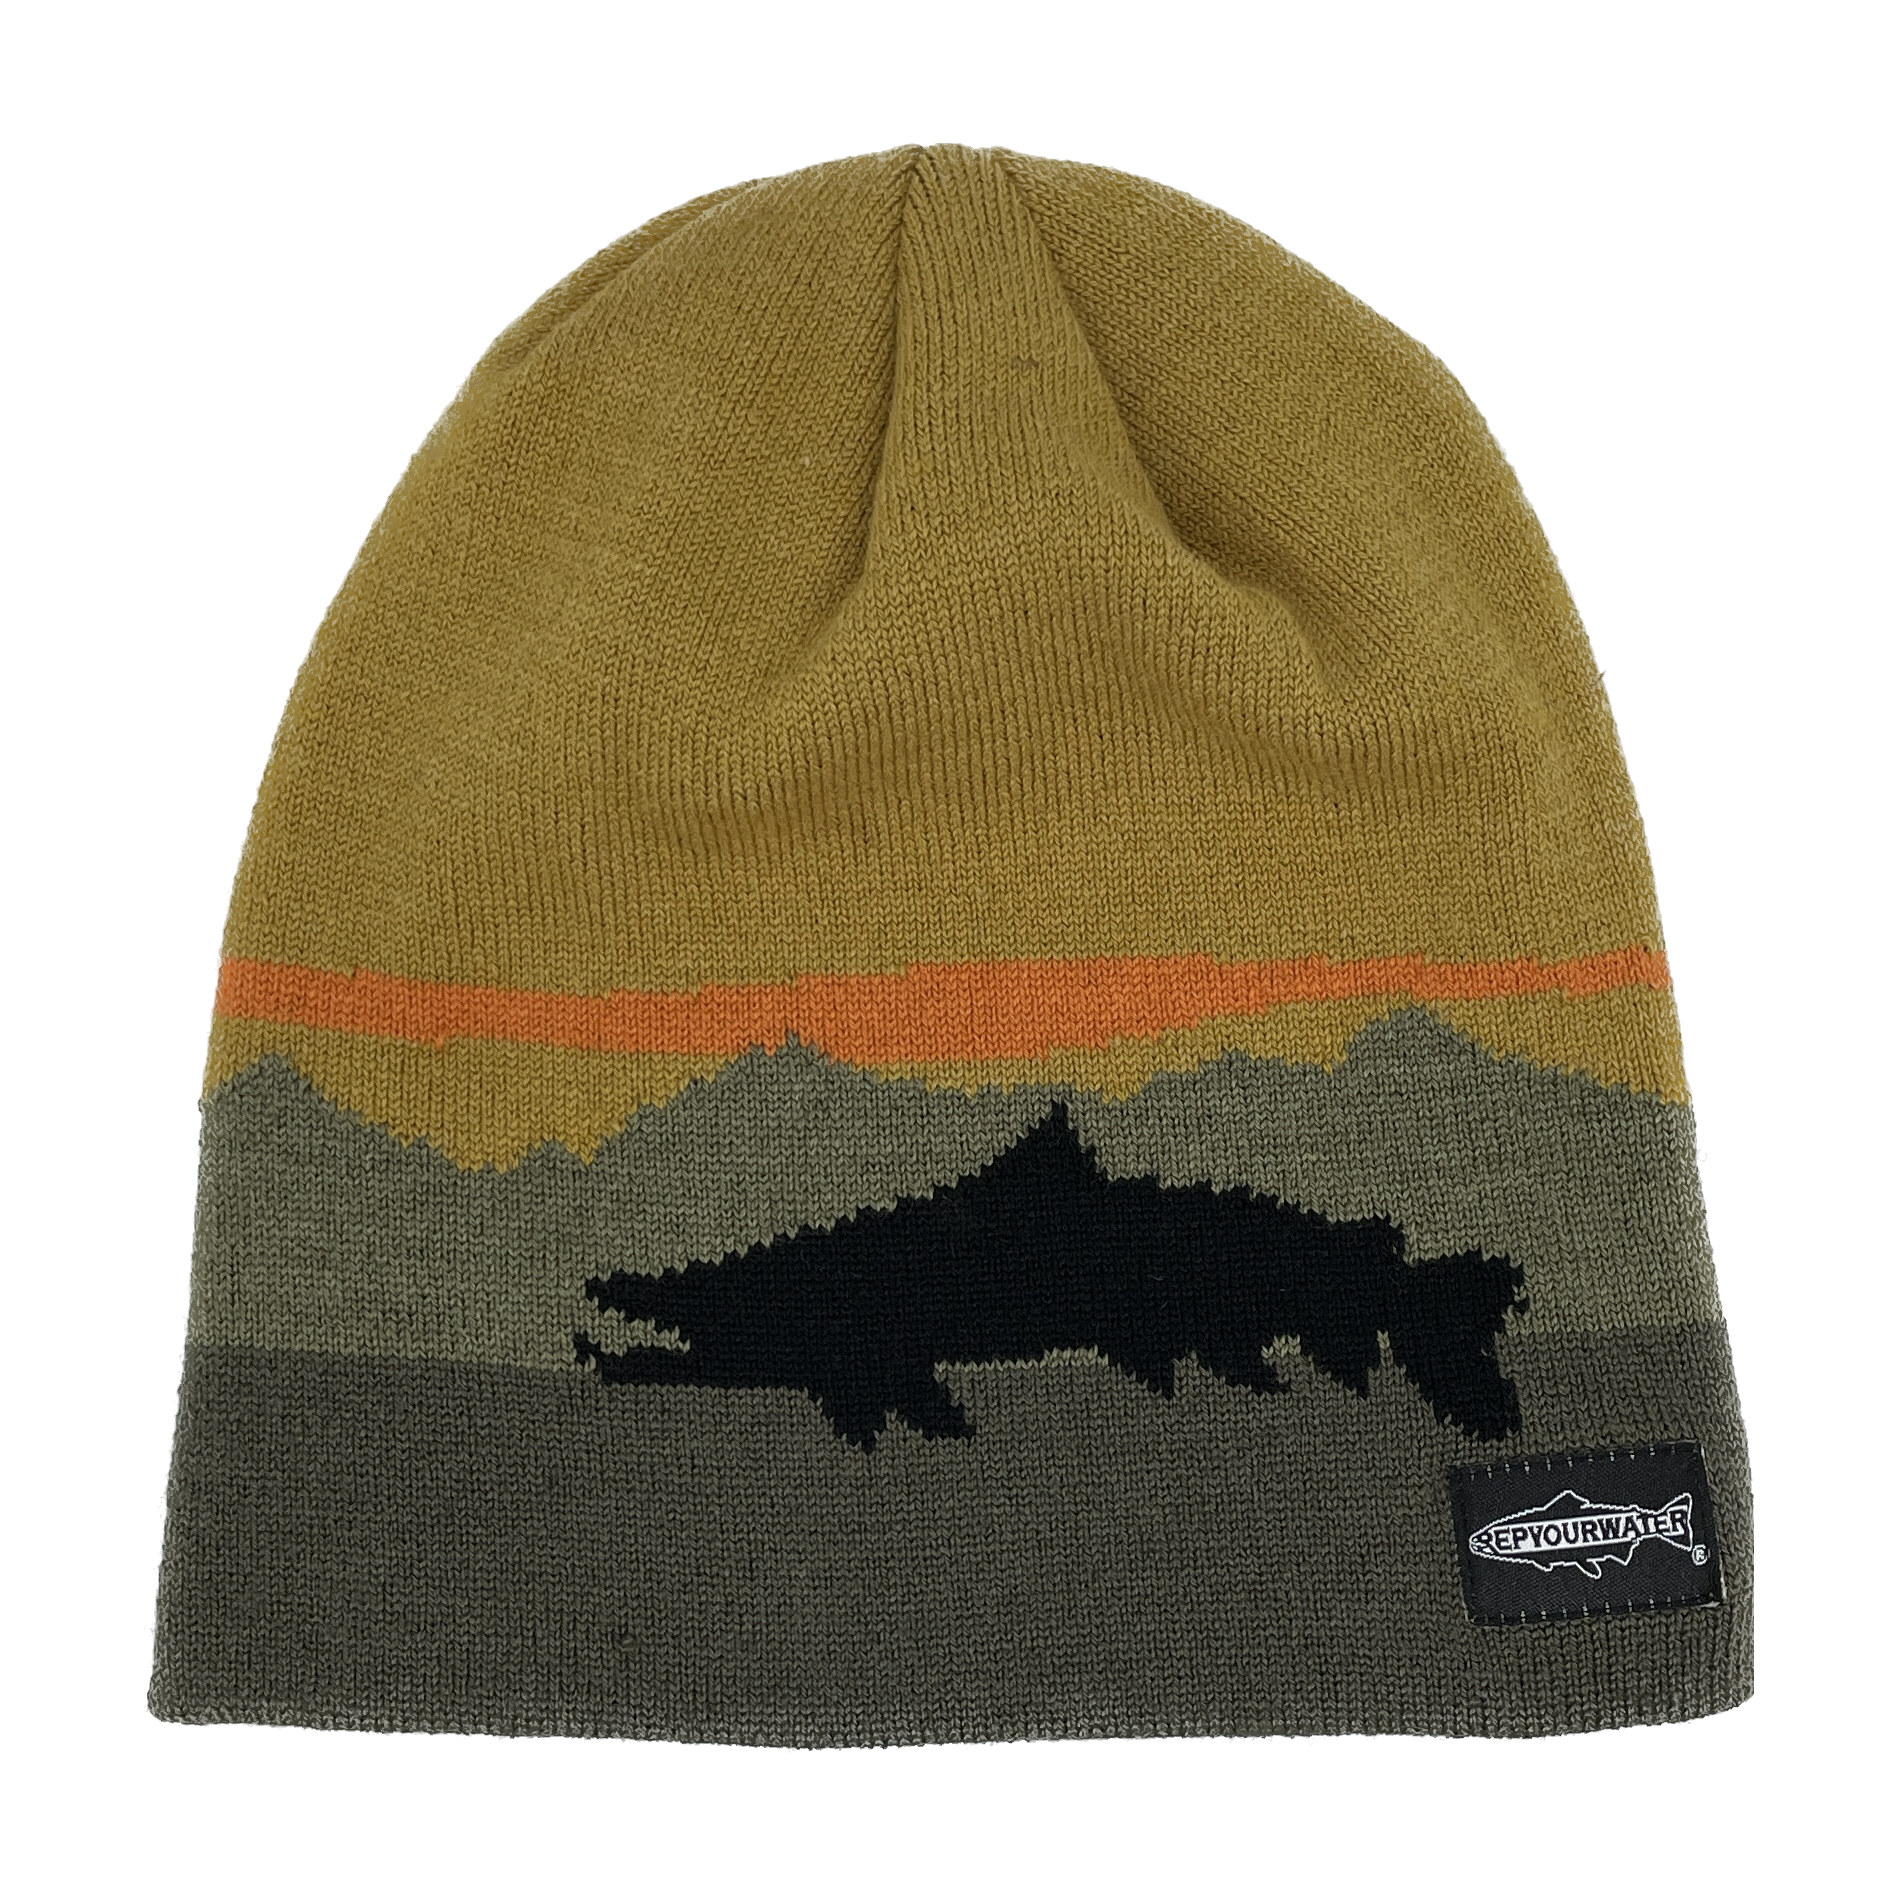 A winter hat with no cuff has a digitized image of a mountain range in the background with a black trout silhouette in the front.  There is a black tag that reads repyourwater.